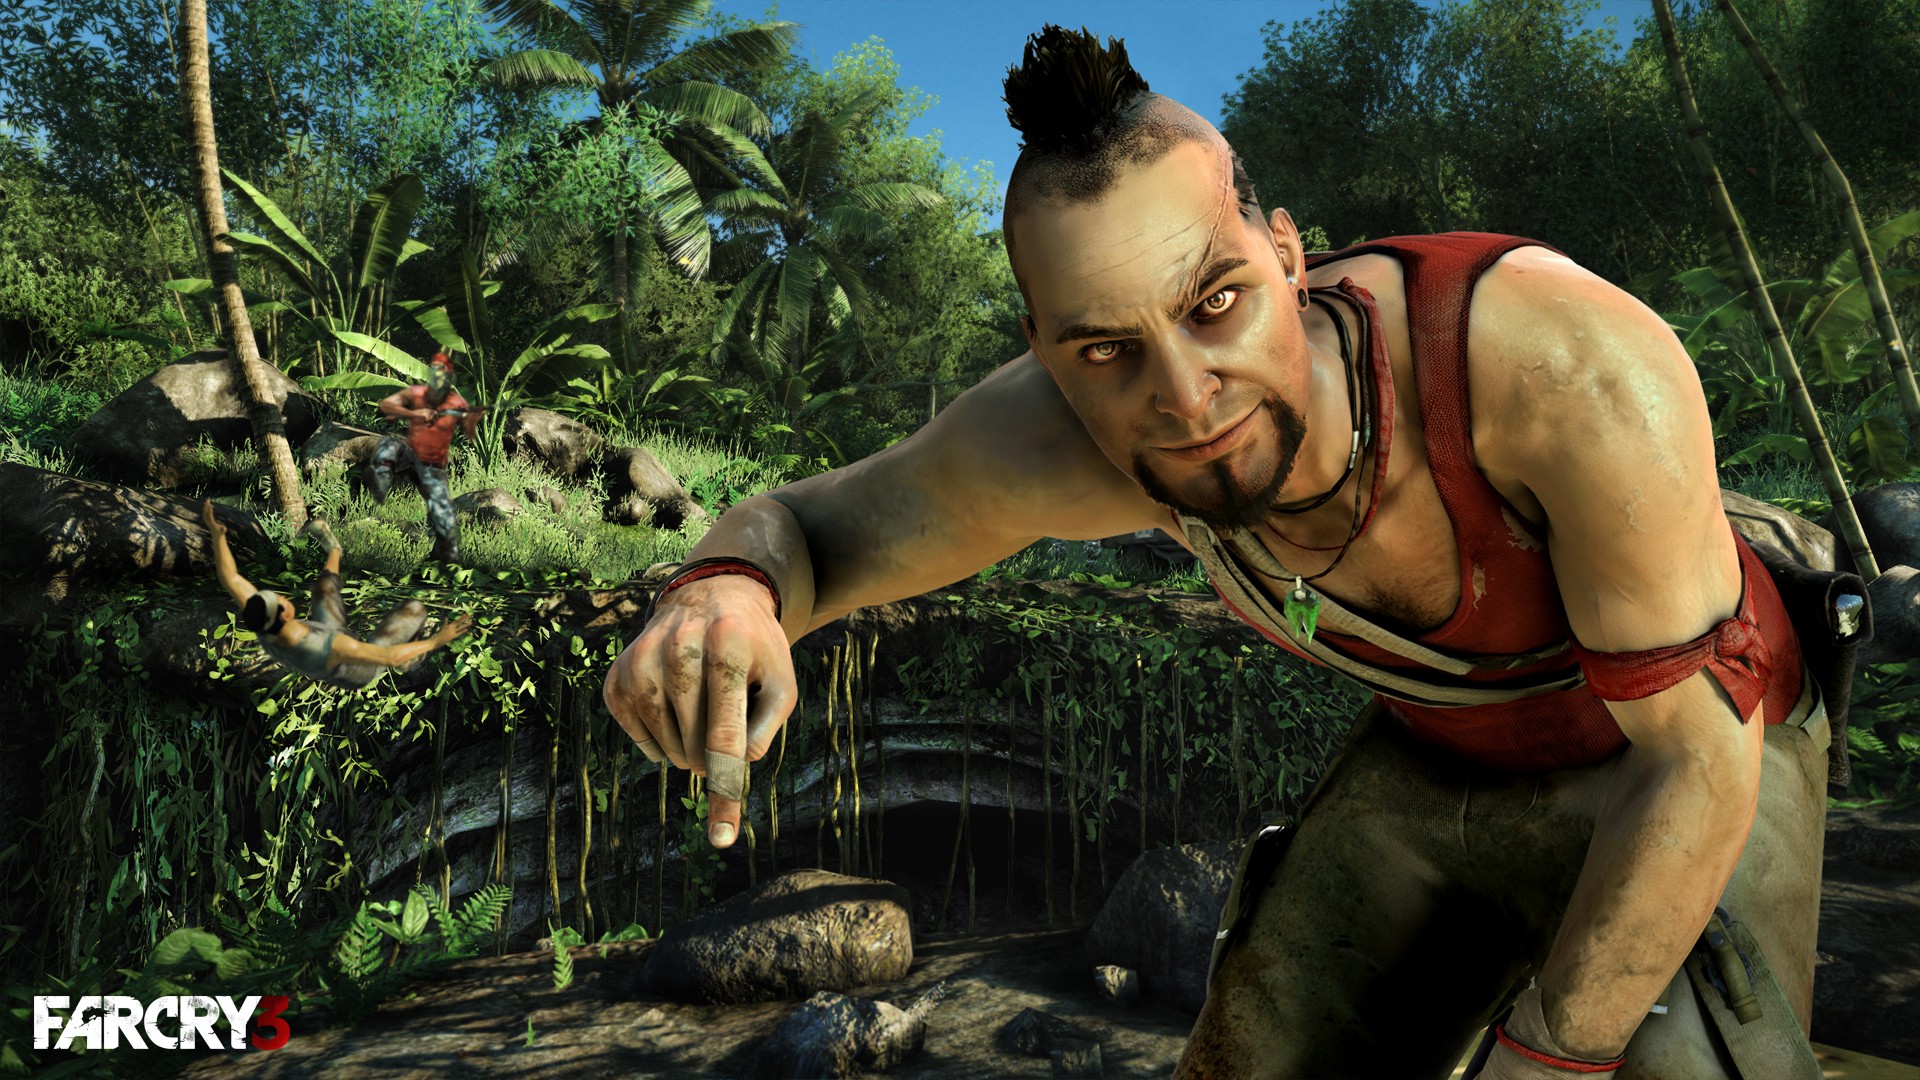 E3 2011 Far Cry 3 Is Official Screenshots and Gameplay Video Available 2 #22: جزیره جنون | نقد و بررسی بازی Far Cry 3